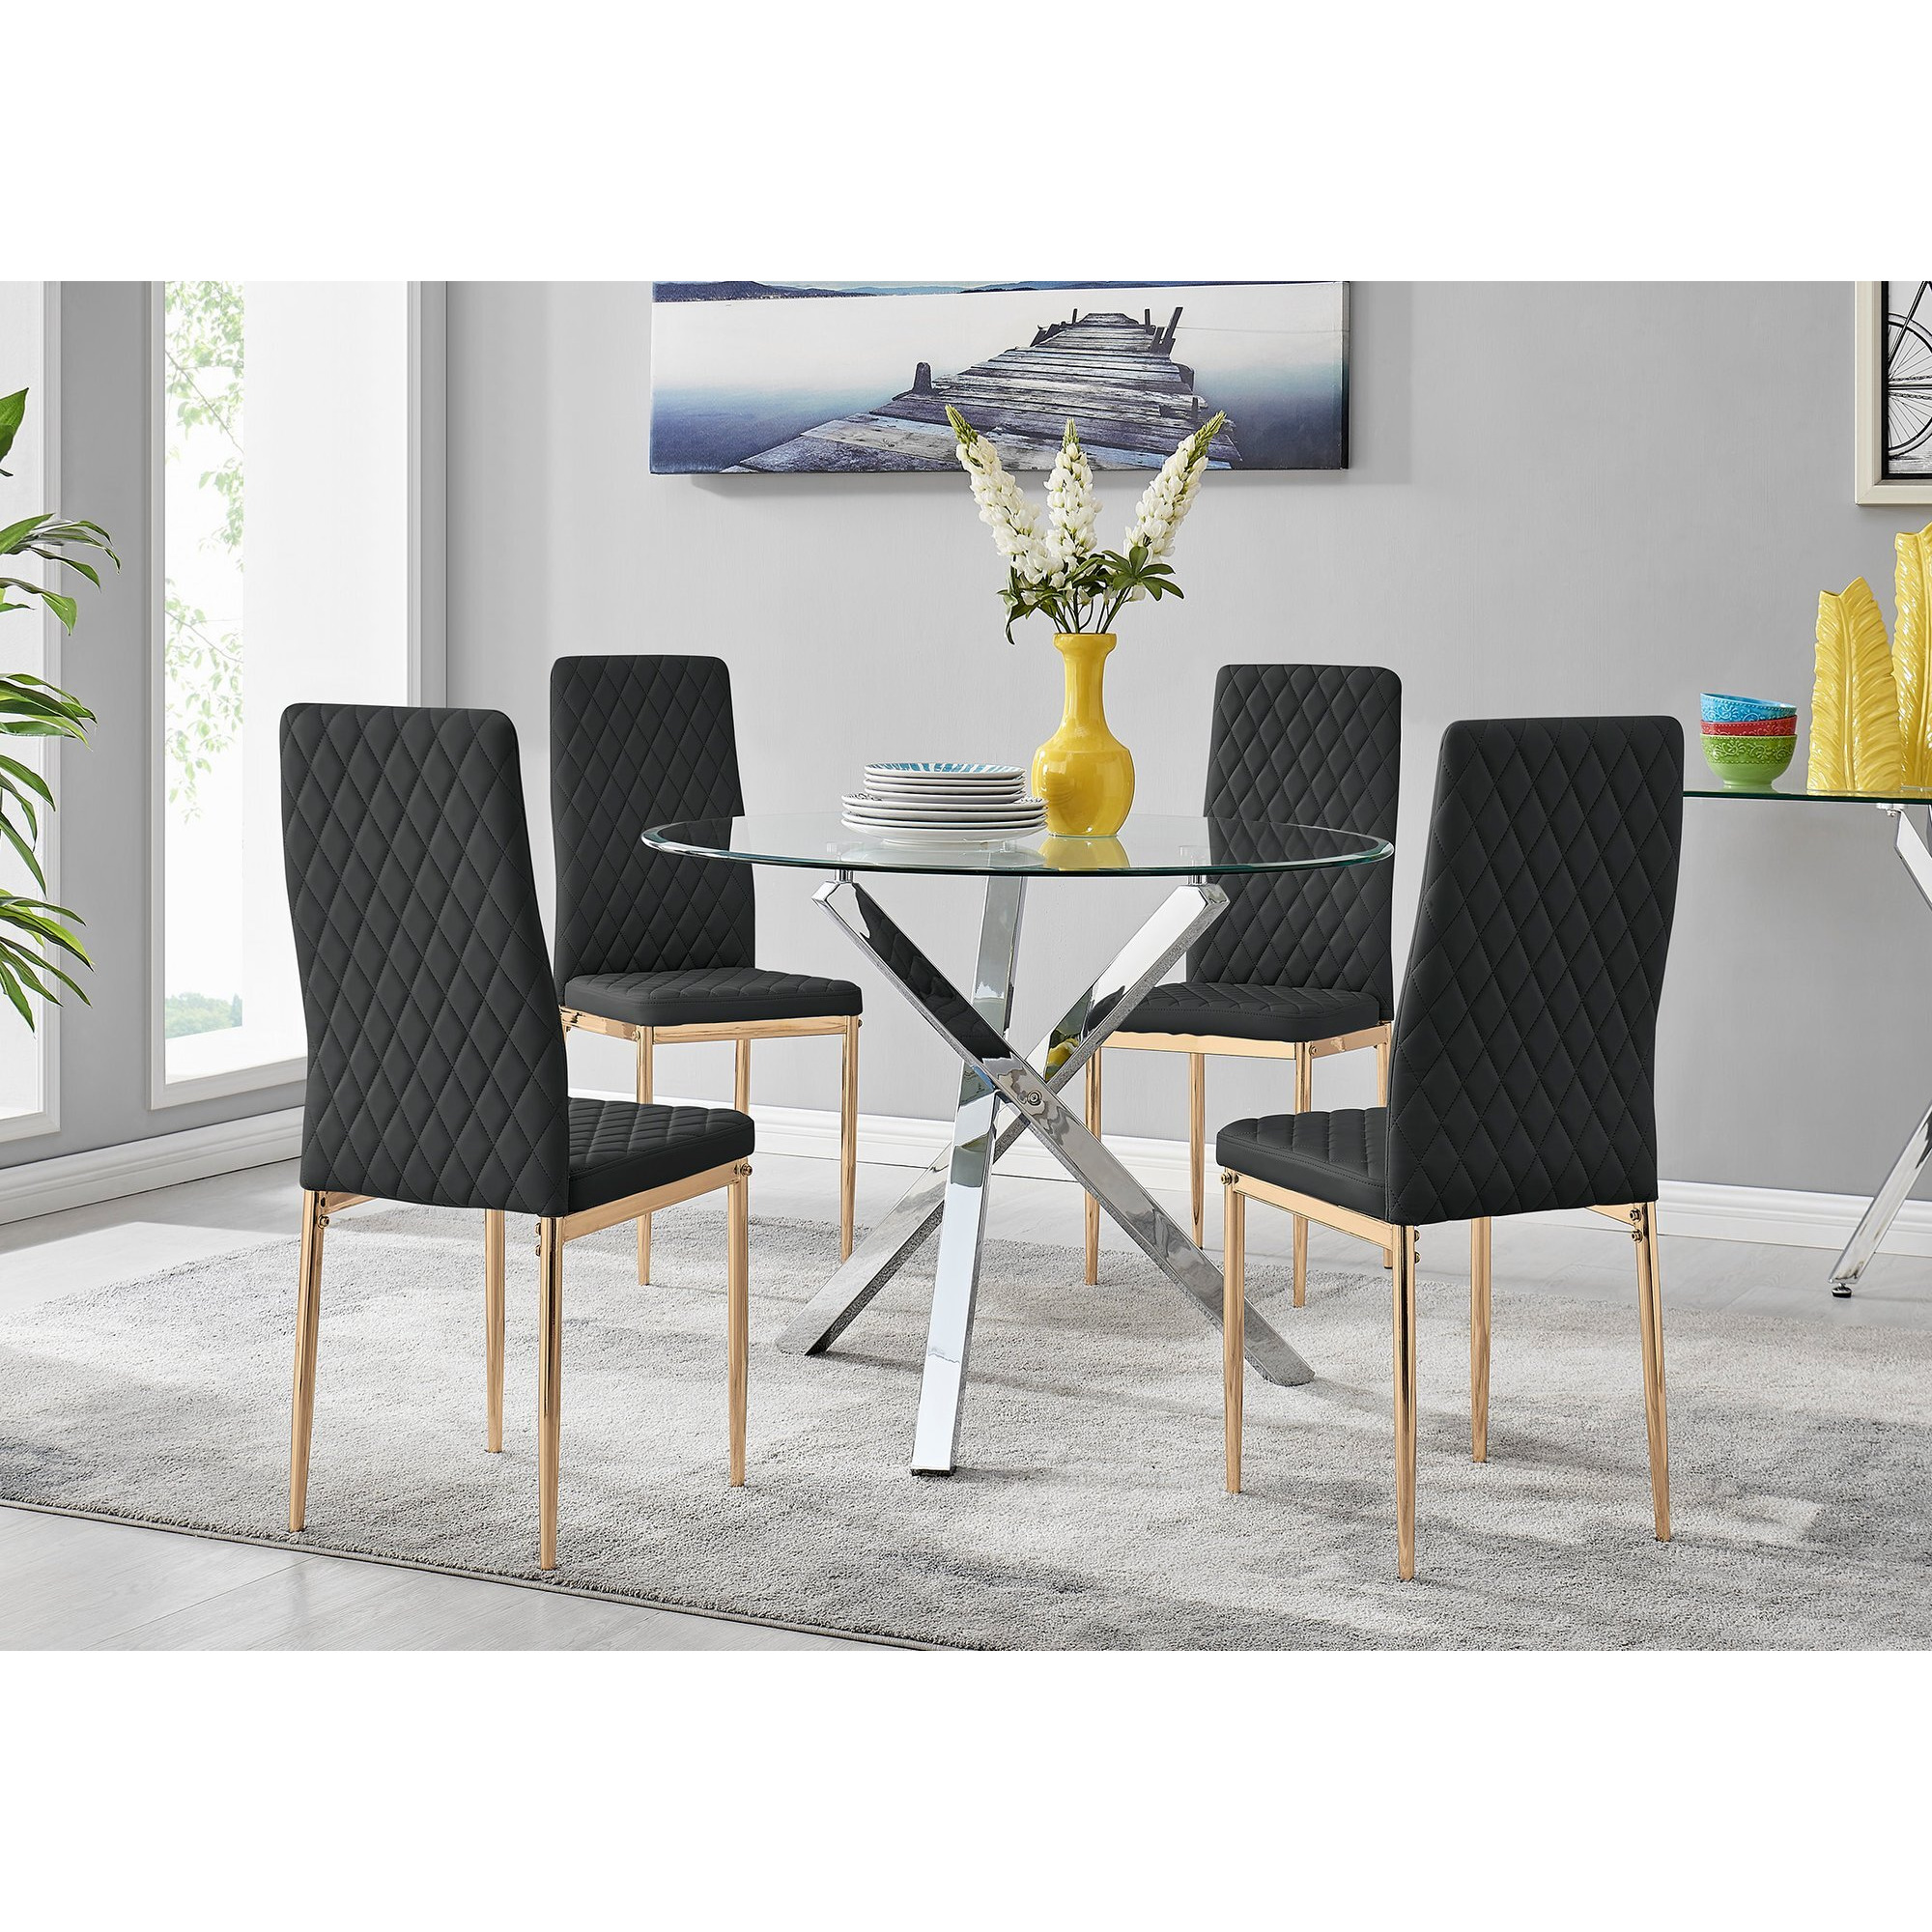 Selina Square Leg Round Dining Table And 4 Gold Leg Milan Chairs